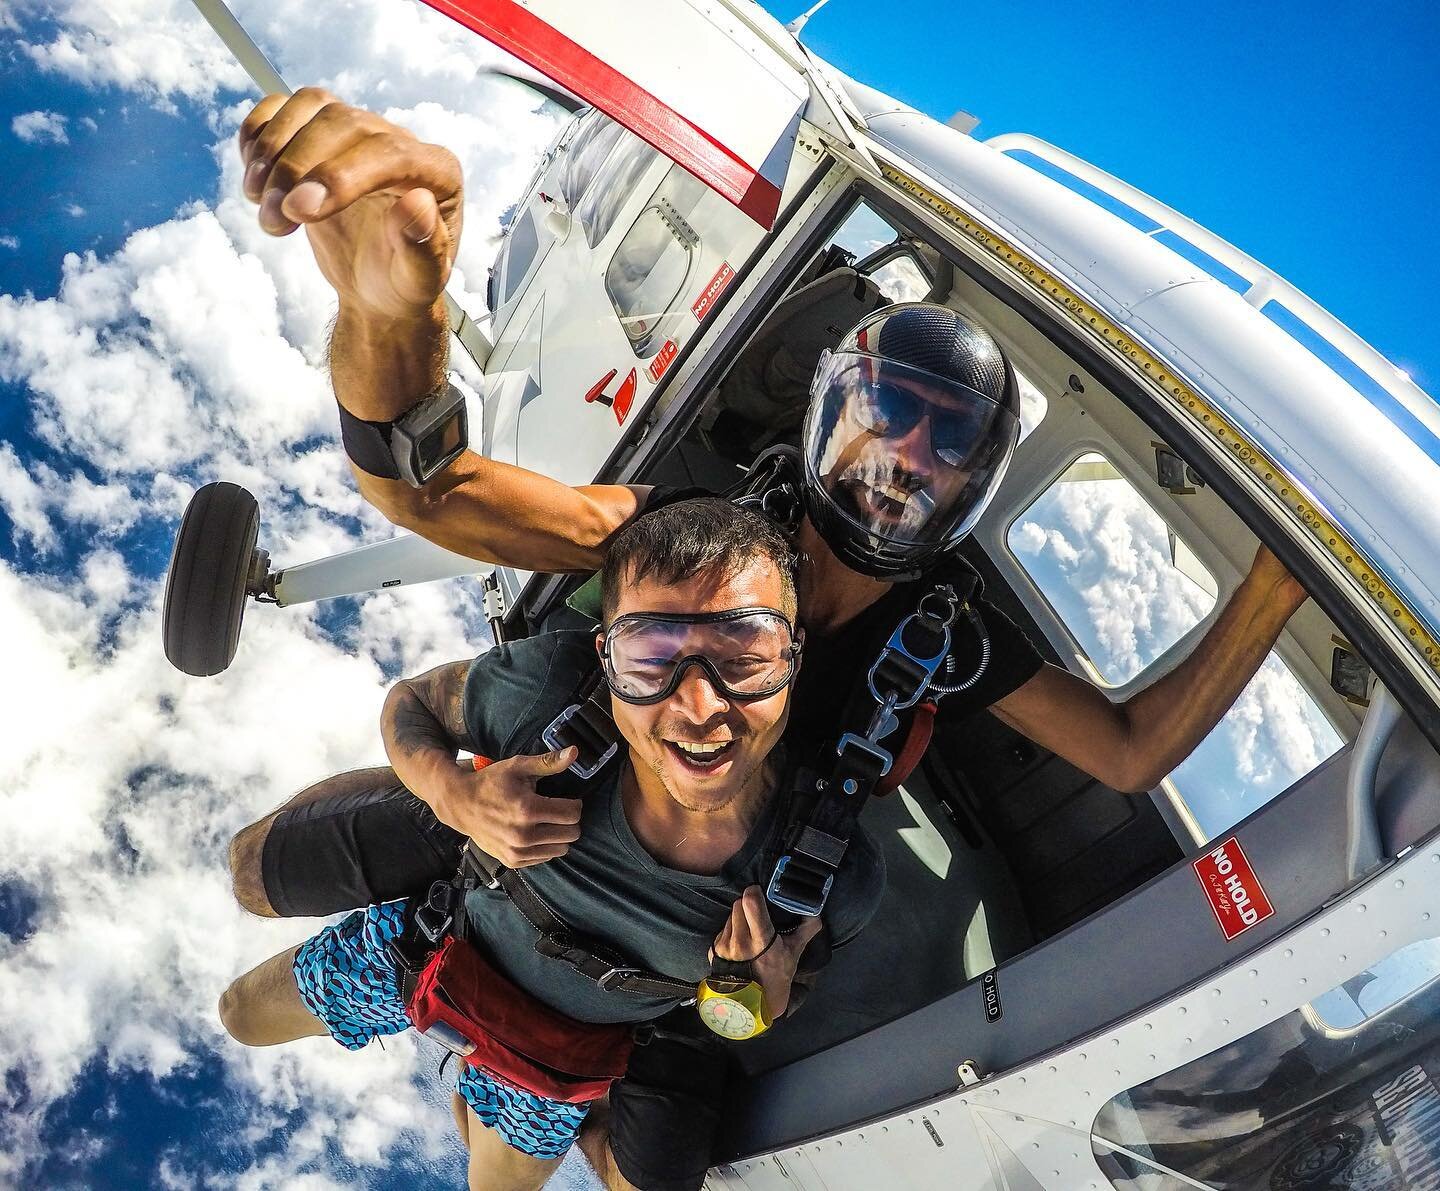 Most people think that jumping from an airplane is similar to a rollercoaster stomach hit... Good news! That does not happen. You can go ahead and book your skydive now... and just ENJOY. 🤍